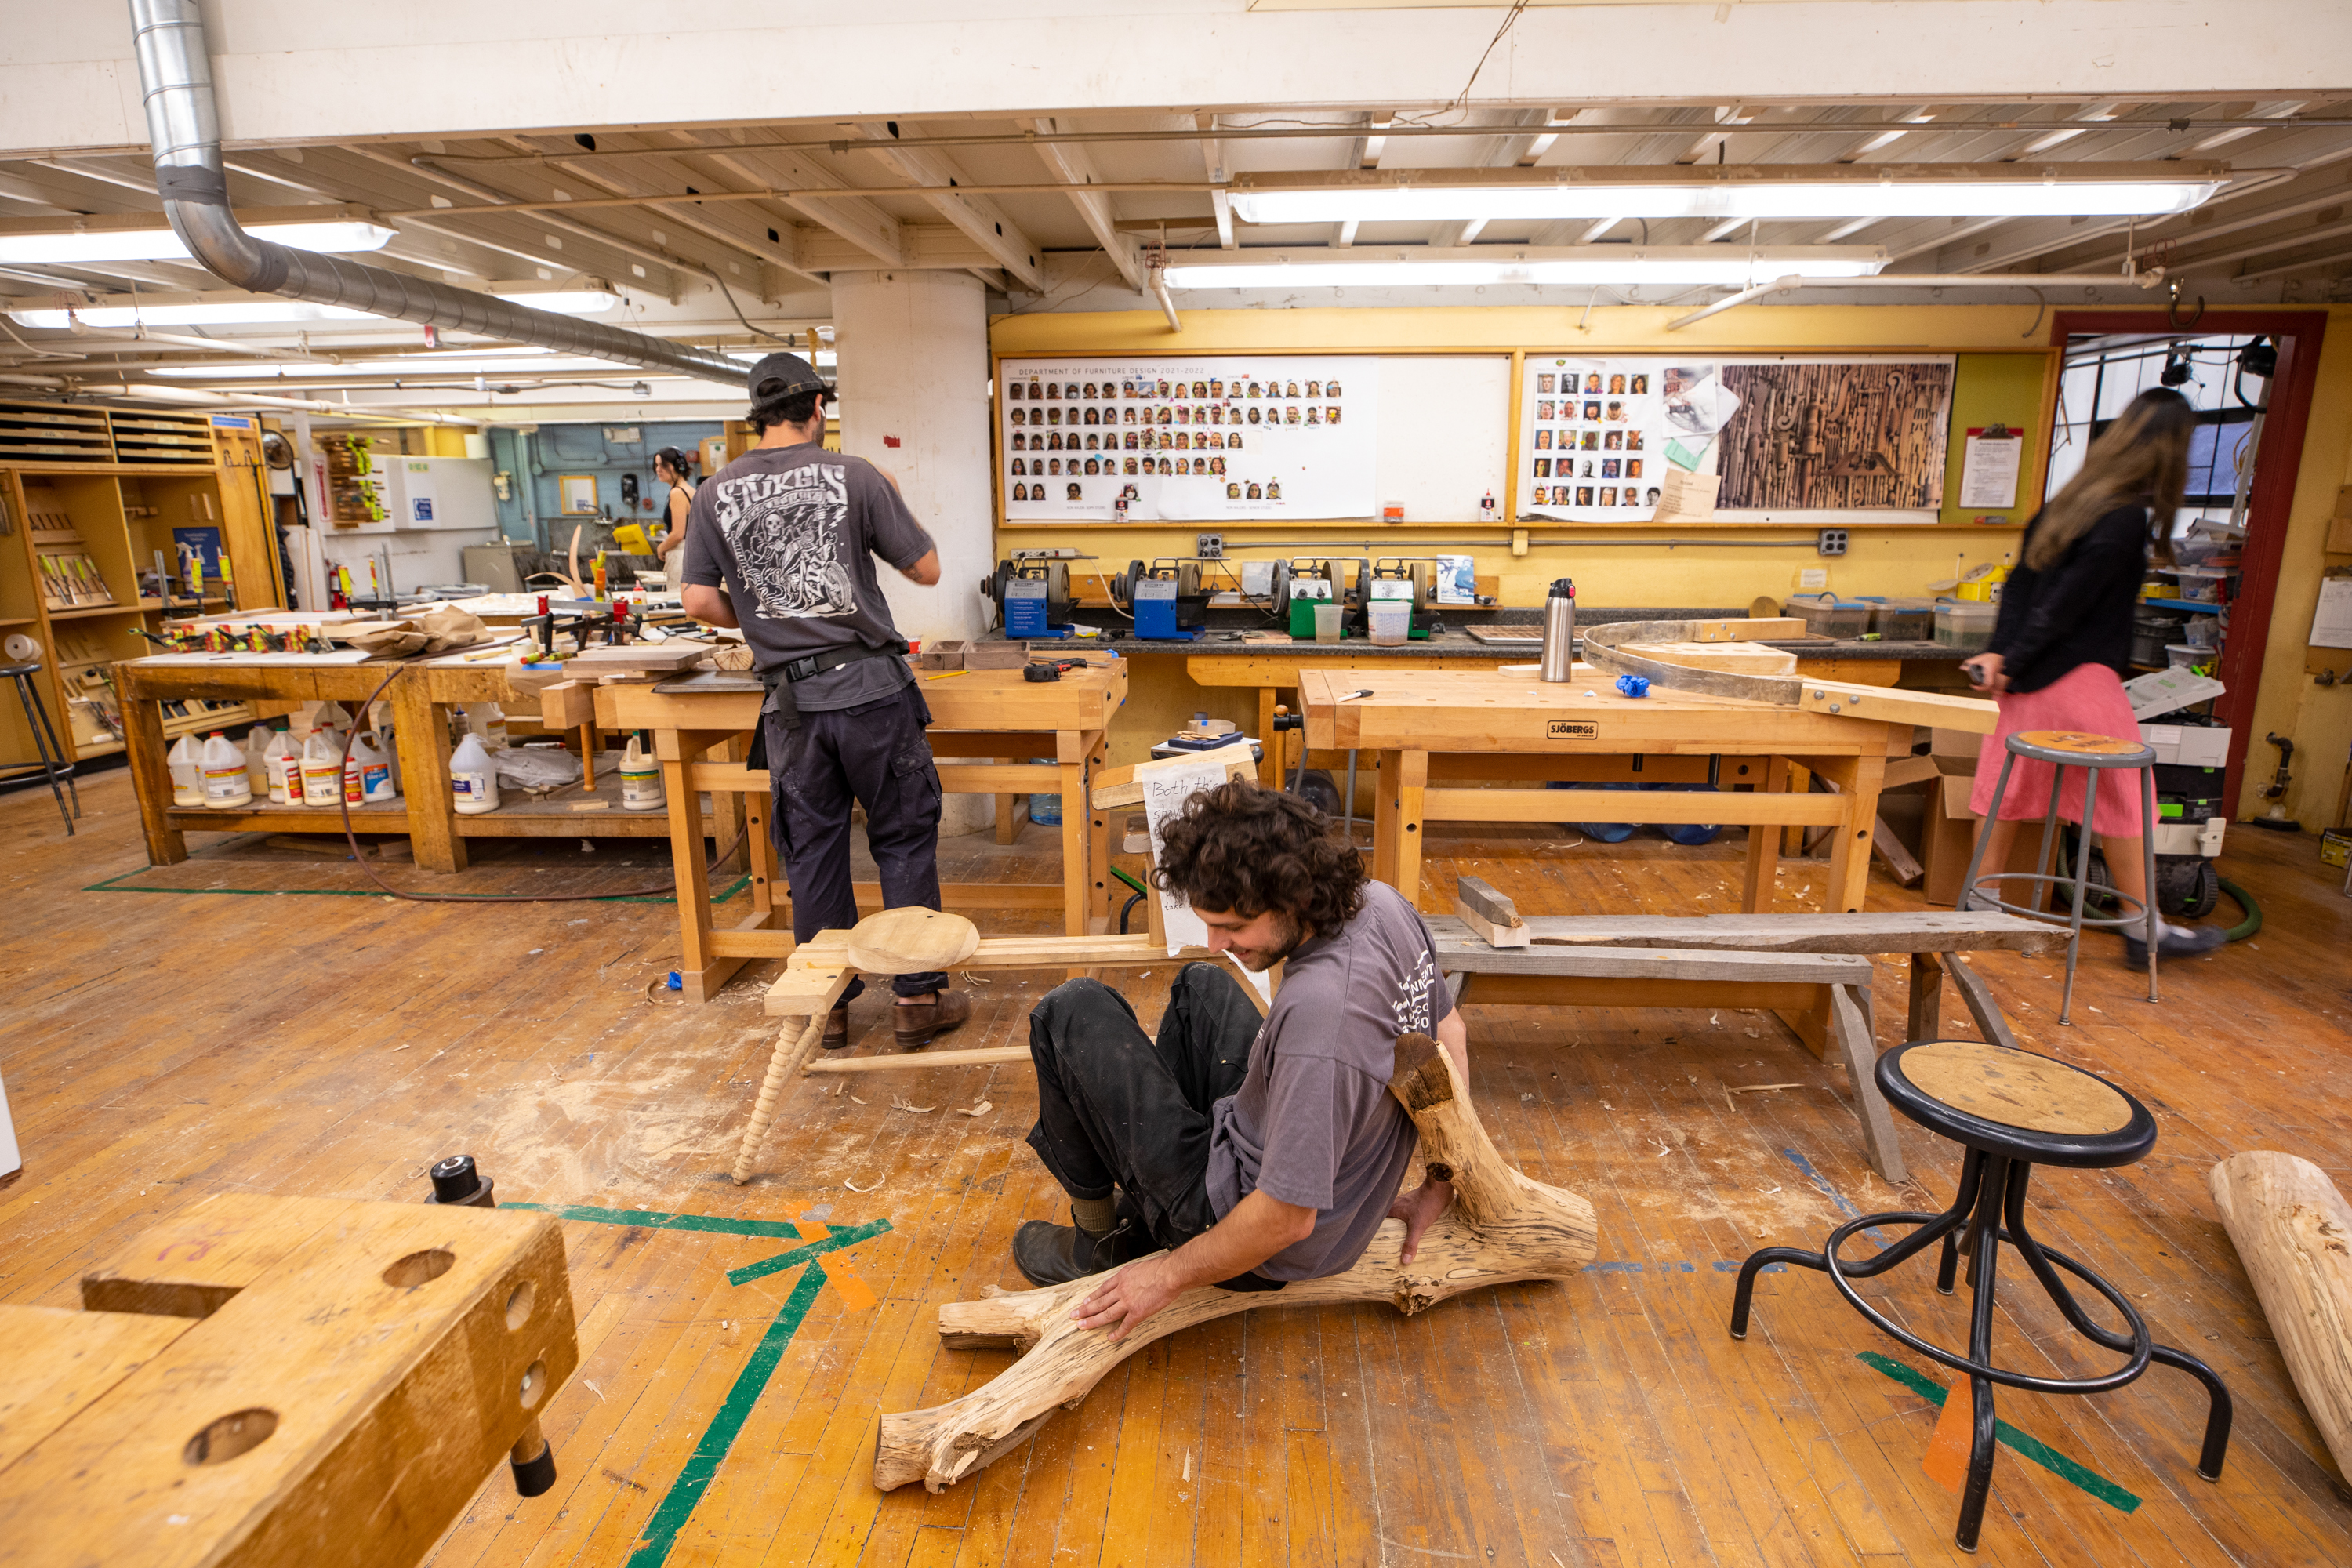 /Three%20students%20in%20a%20woodshop.%20One%20works%20at%20a%20bench%2C%20one%20sits%20on%20a%20piece%20of%20driftwood%2C%20and%20the%20third%20walks%20around.